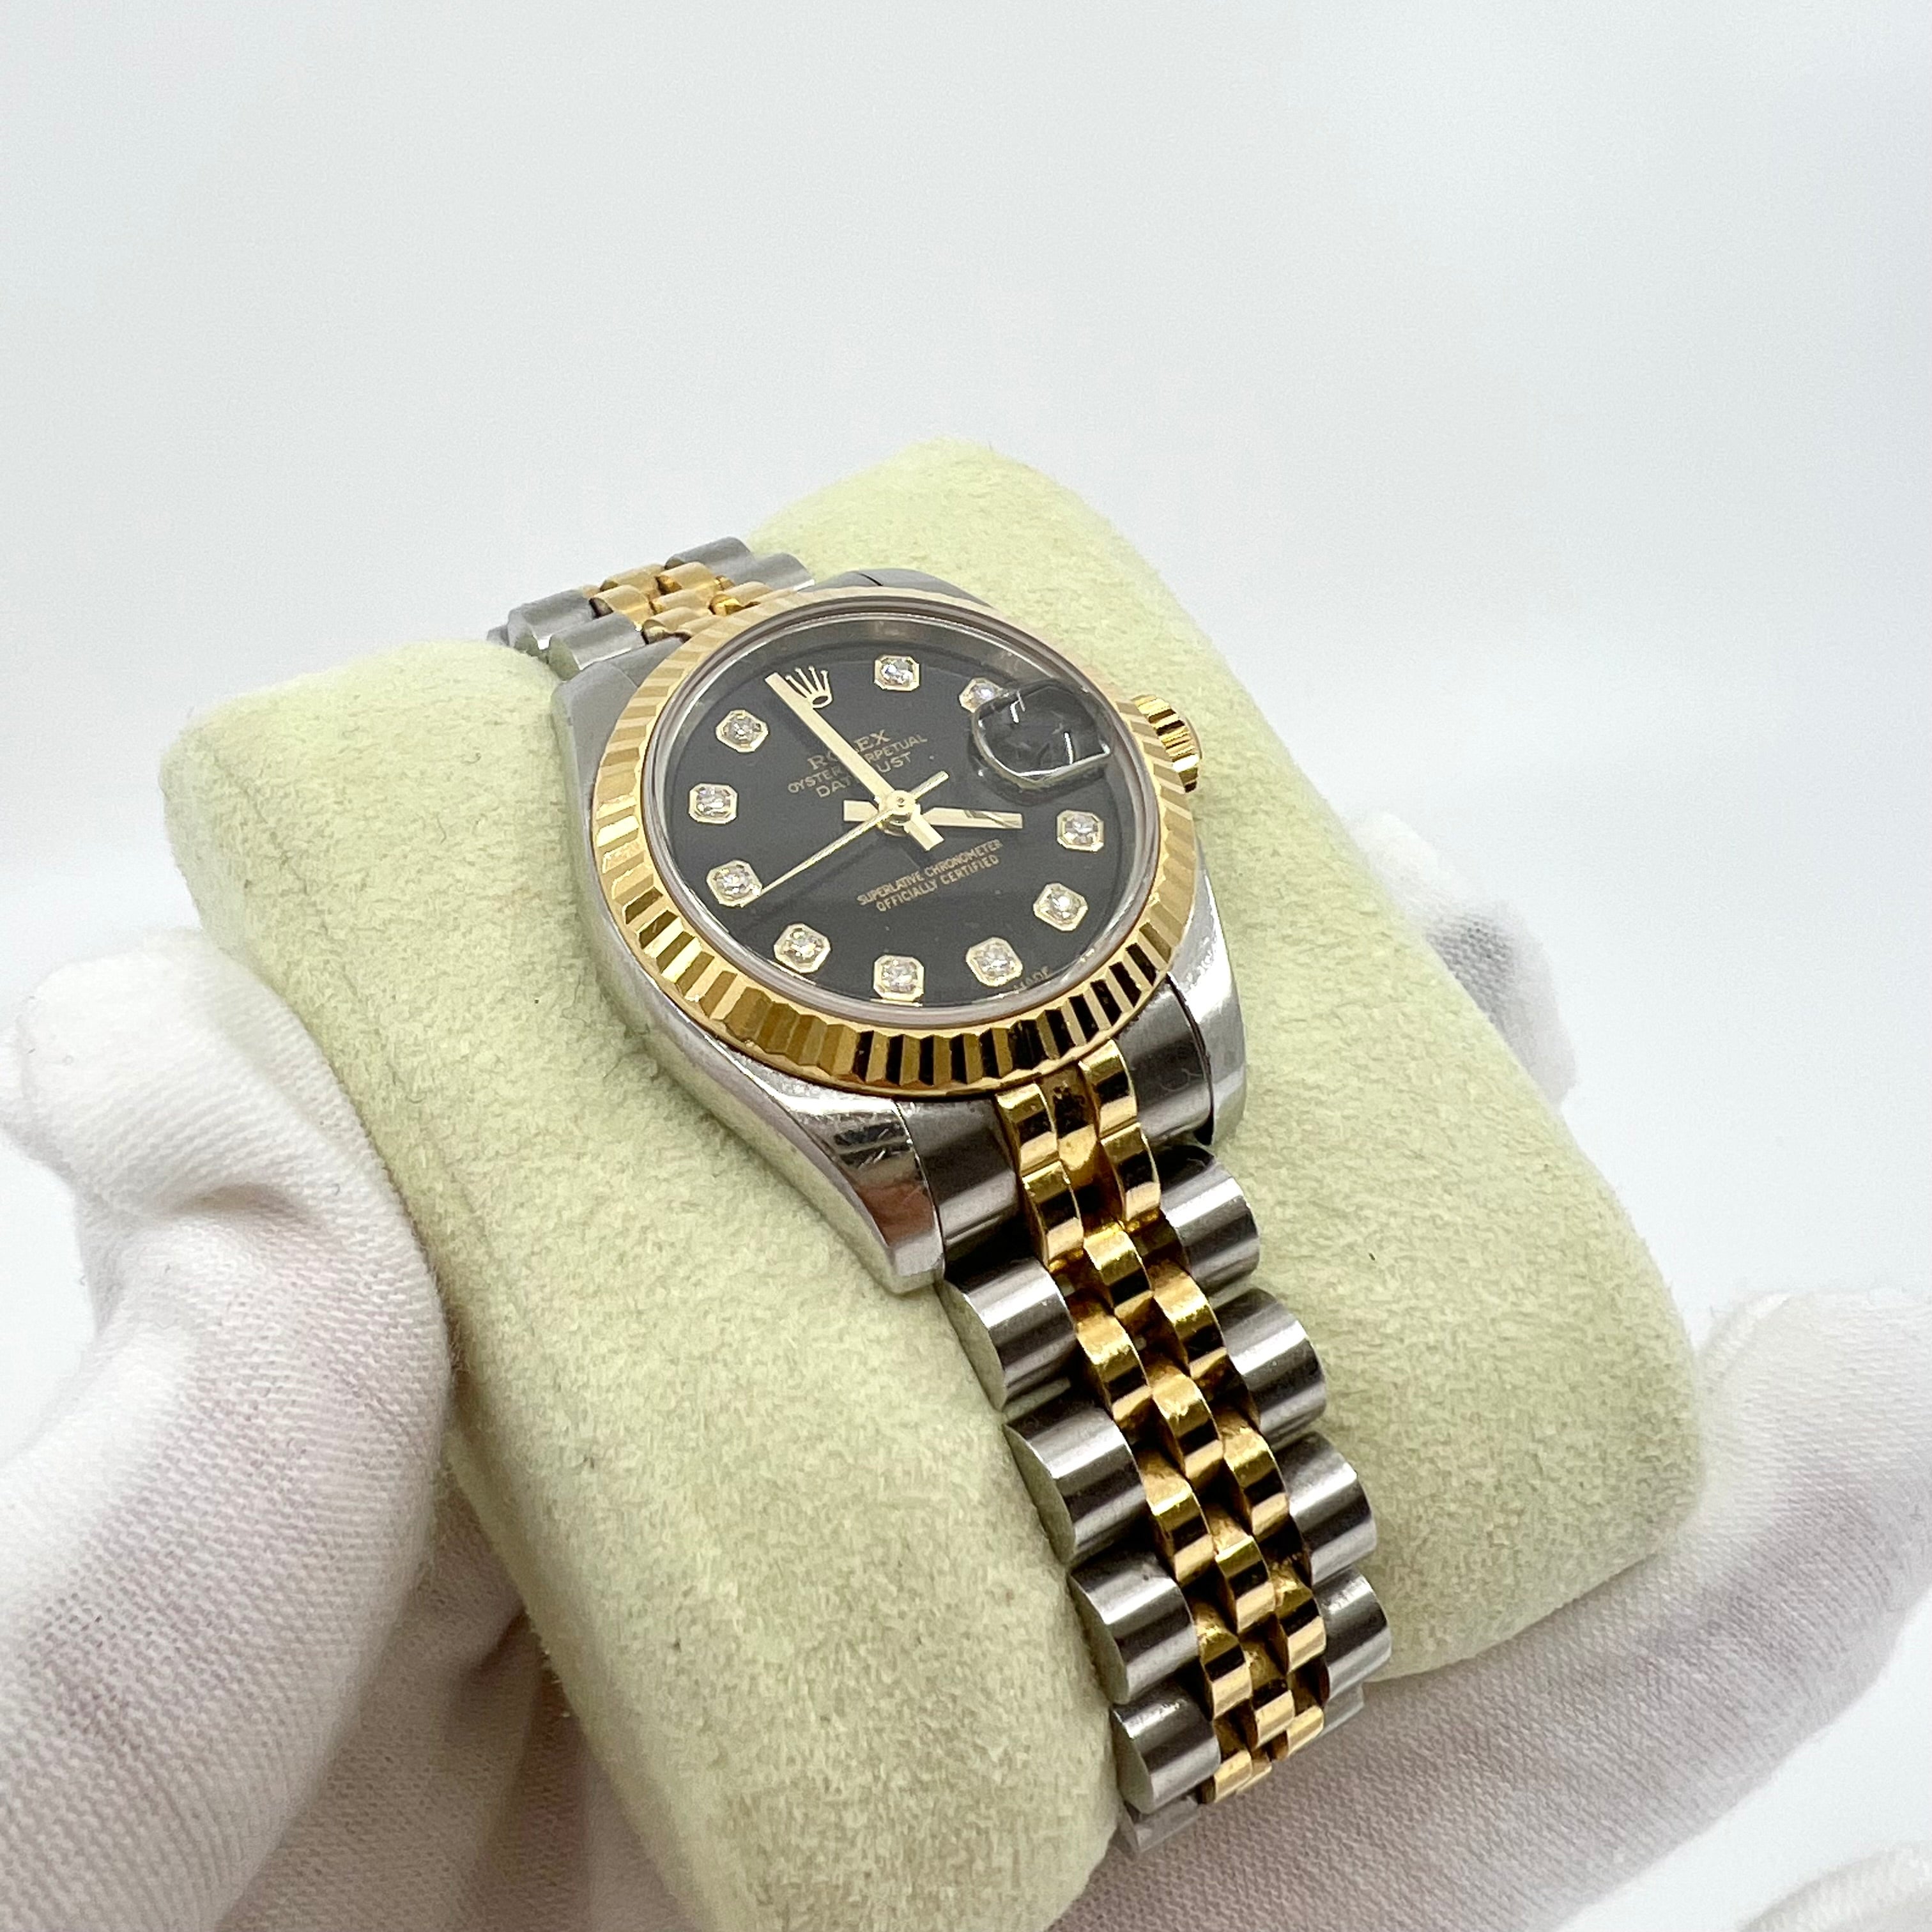 ROLEX 179173 Lady-Datejust 26mm Two-Tone Black Diamond Dial Fluted Bezel Jubilee Band